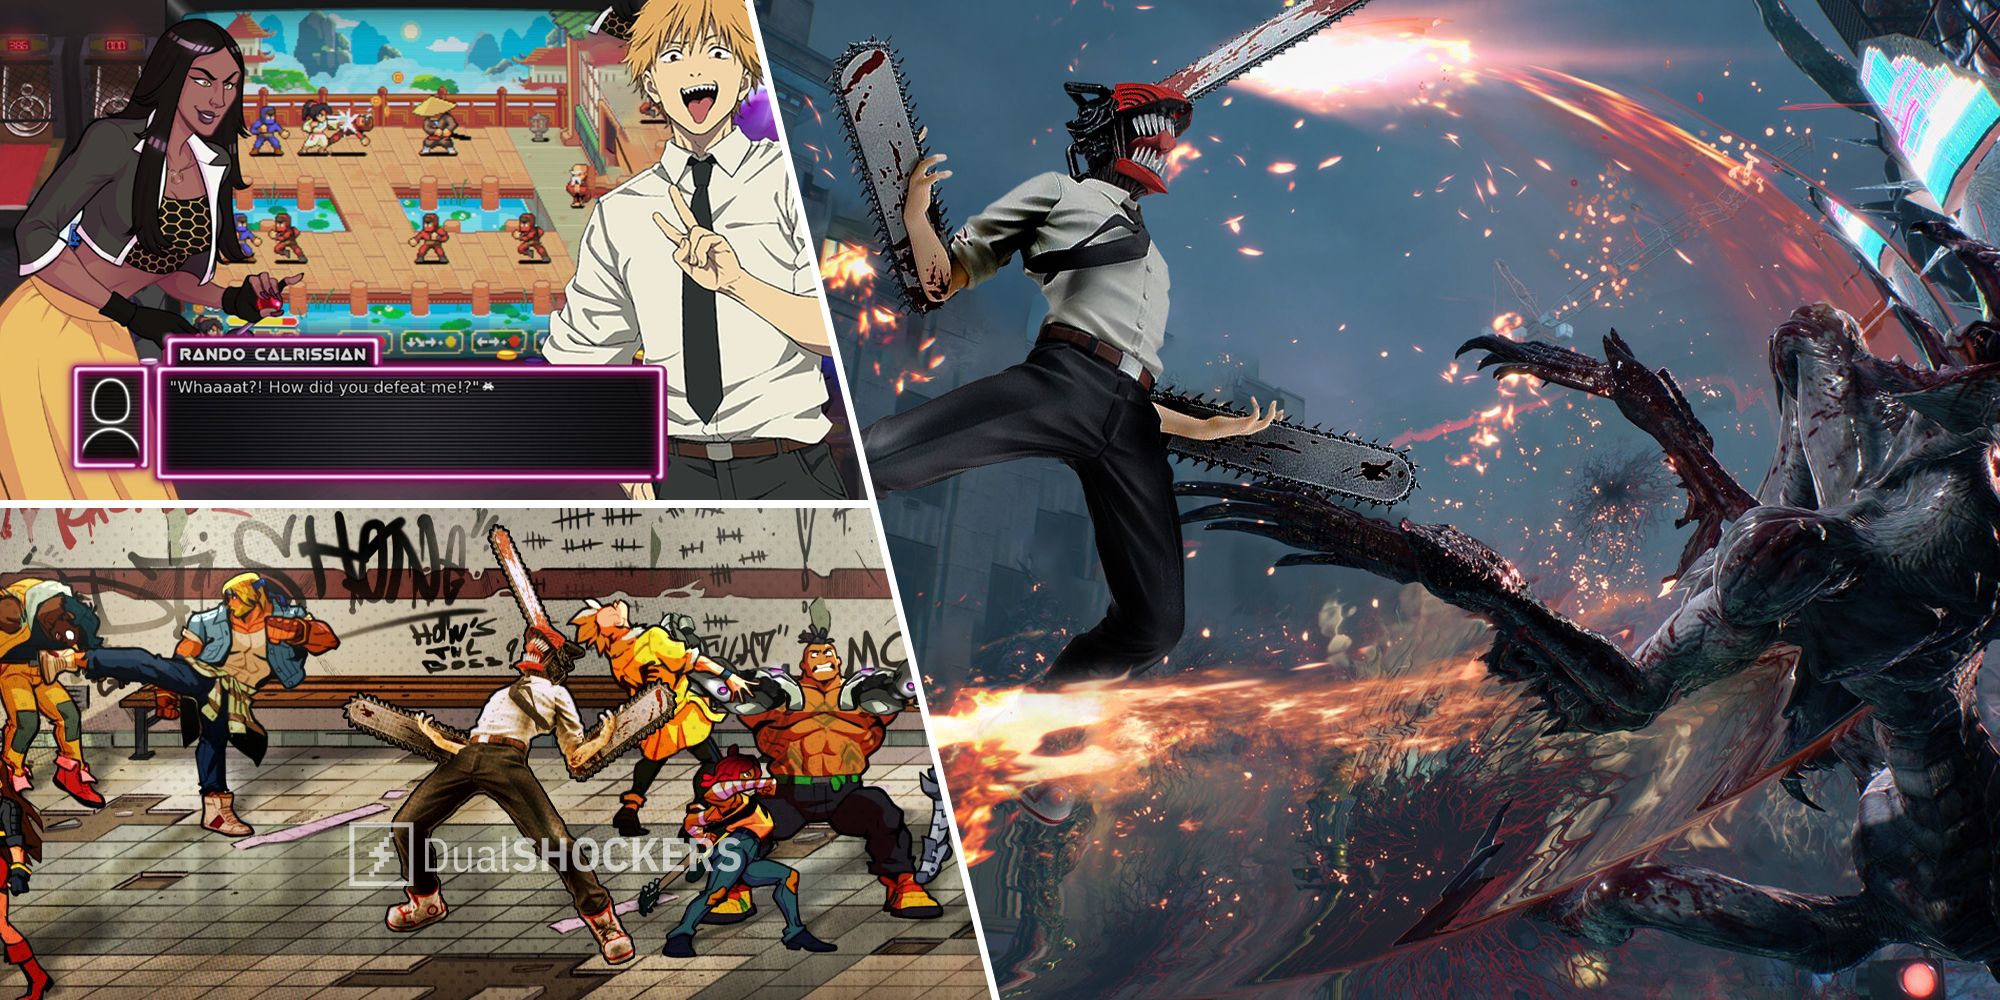 Okay, But What If Chainsaw Man Was A Video Game?